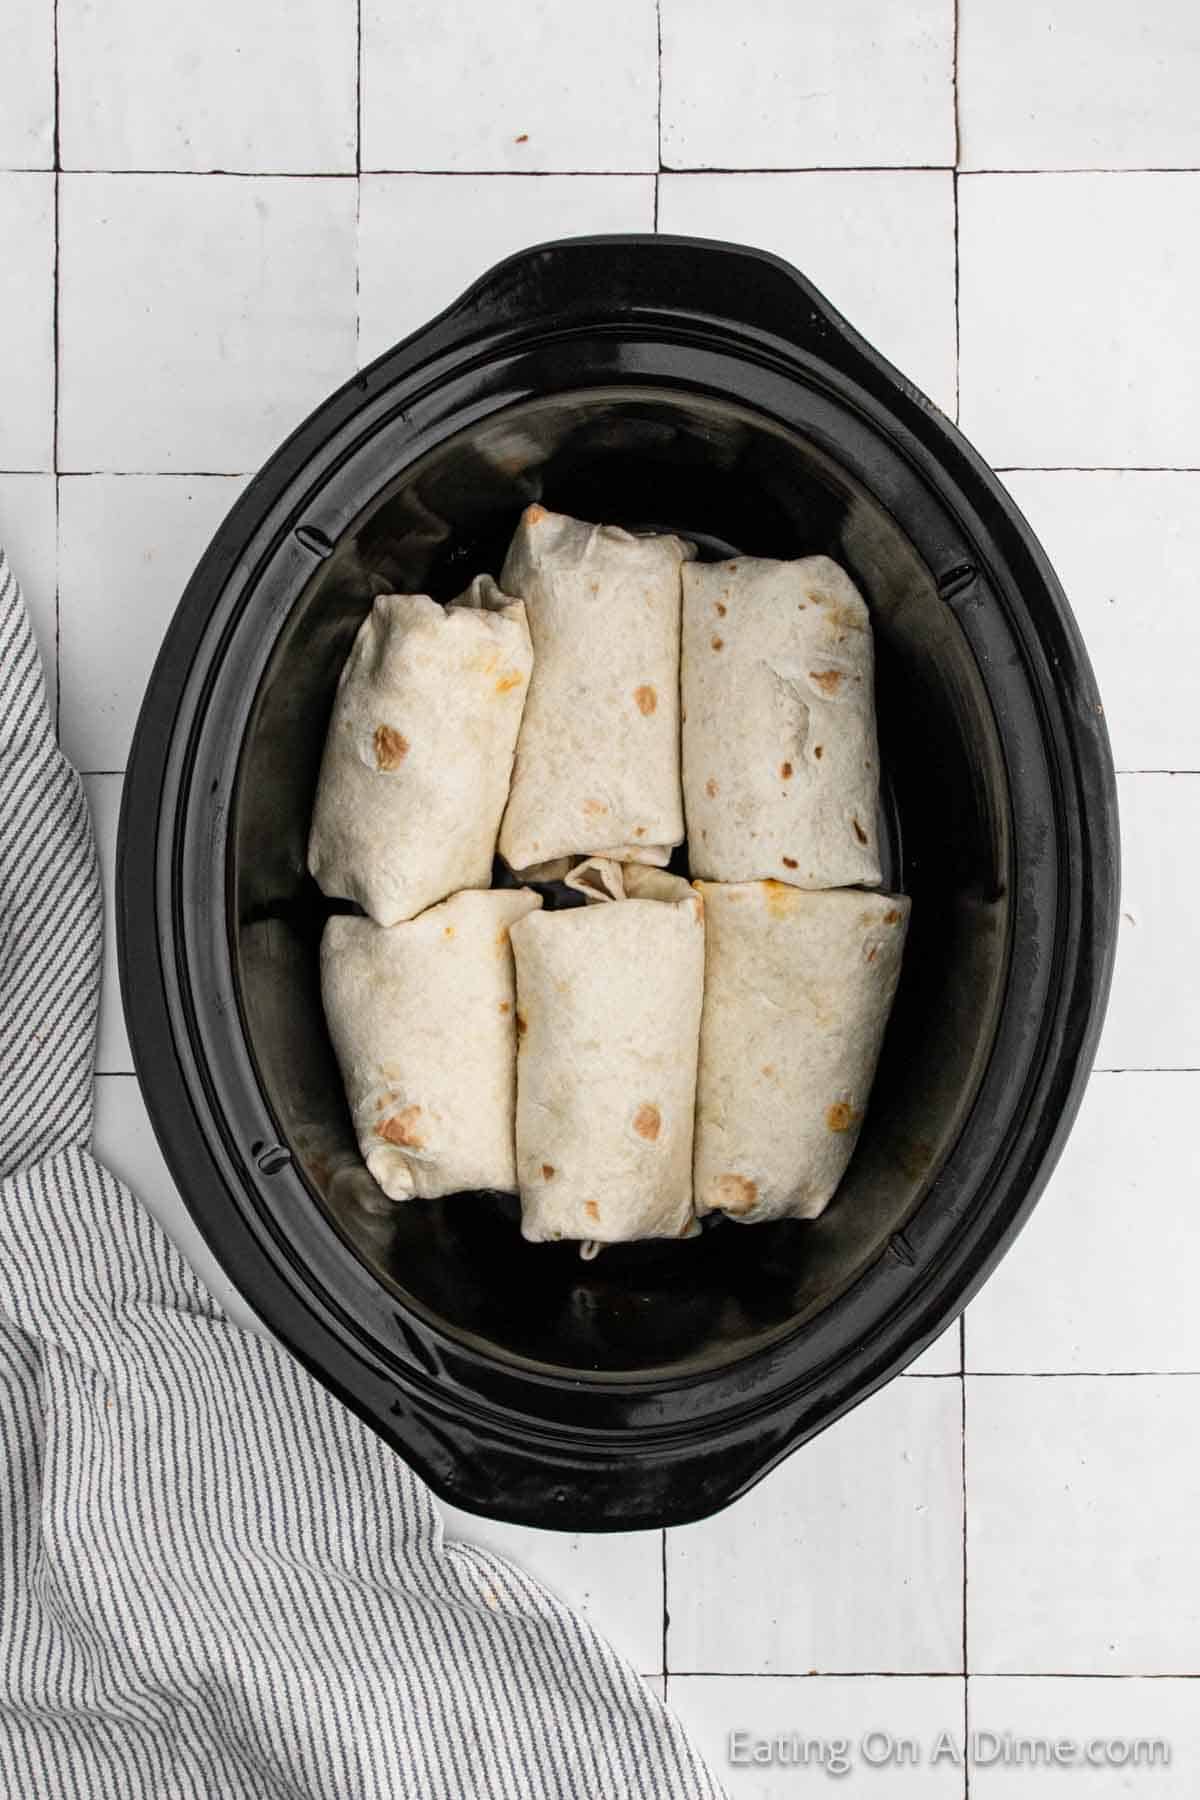 Burritos in a slow cooker